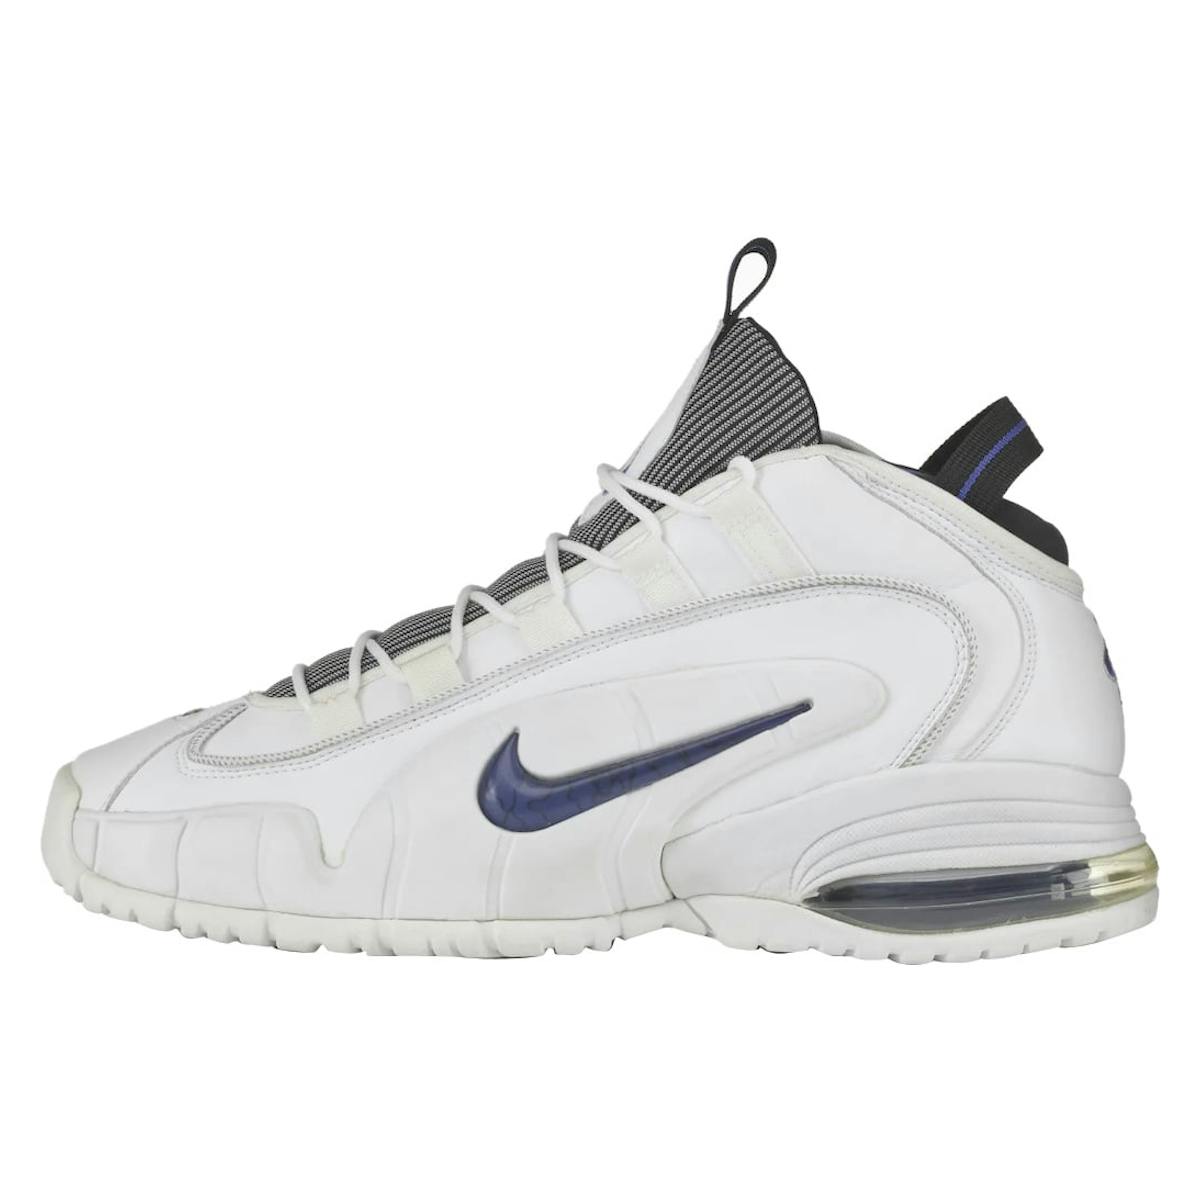 Nike Air Max Penny "Home"